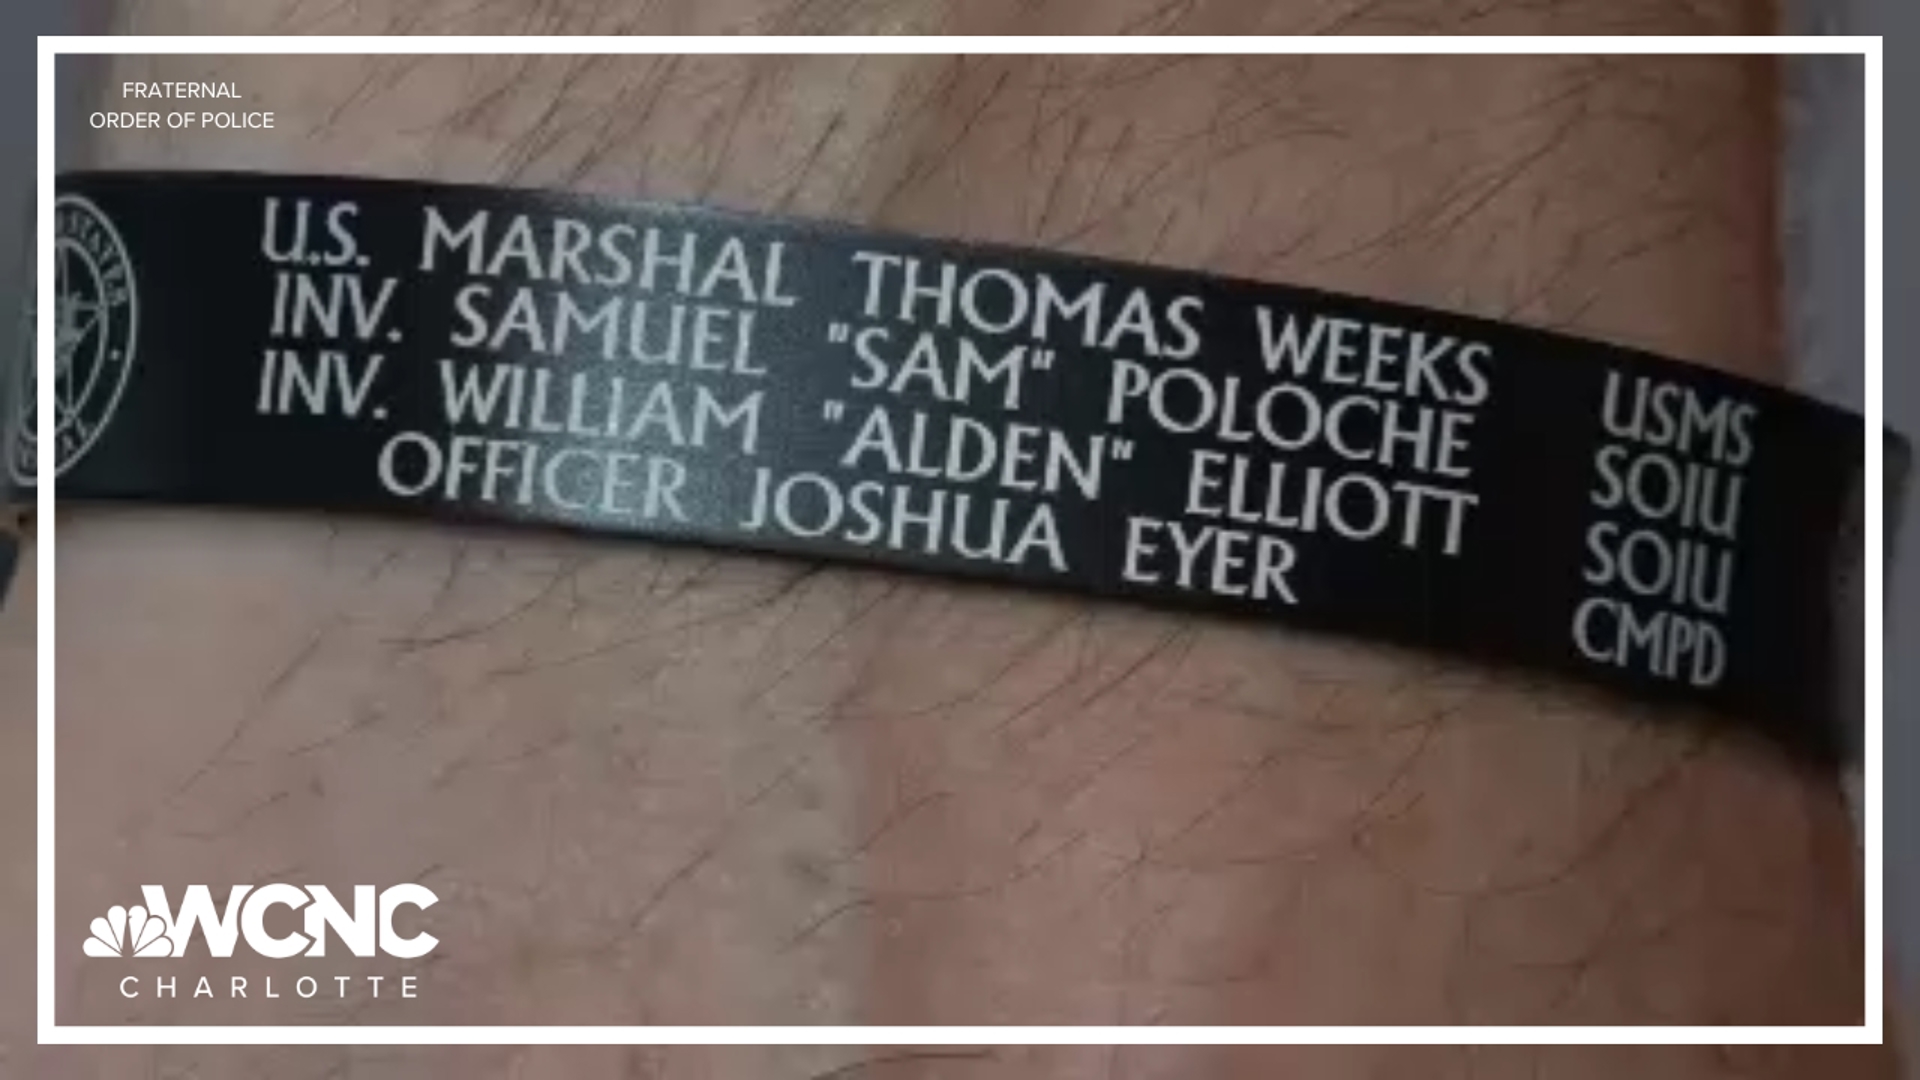 The FOP is selling the bracelets to raise money for the officers' families.